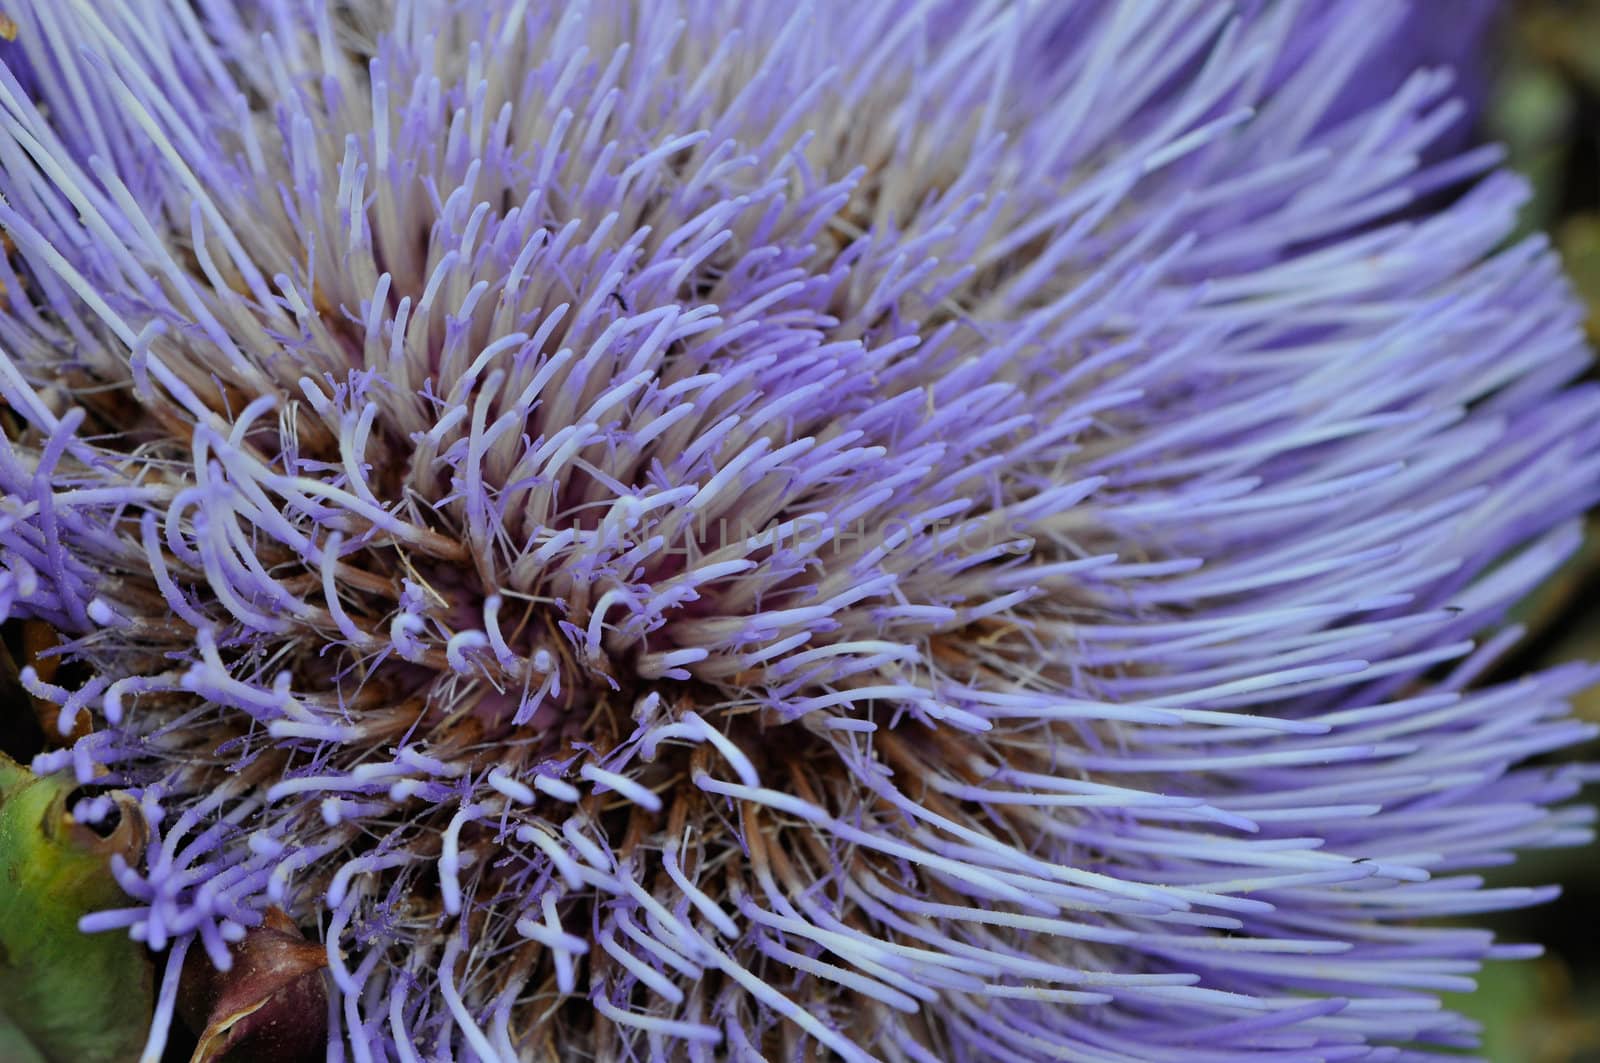 Extreme close-up of a purple articoke flower with many pistils